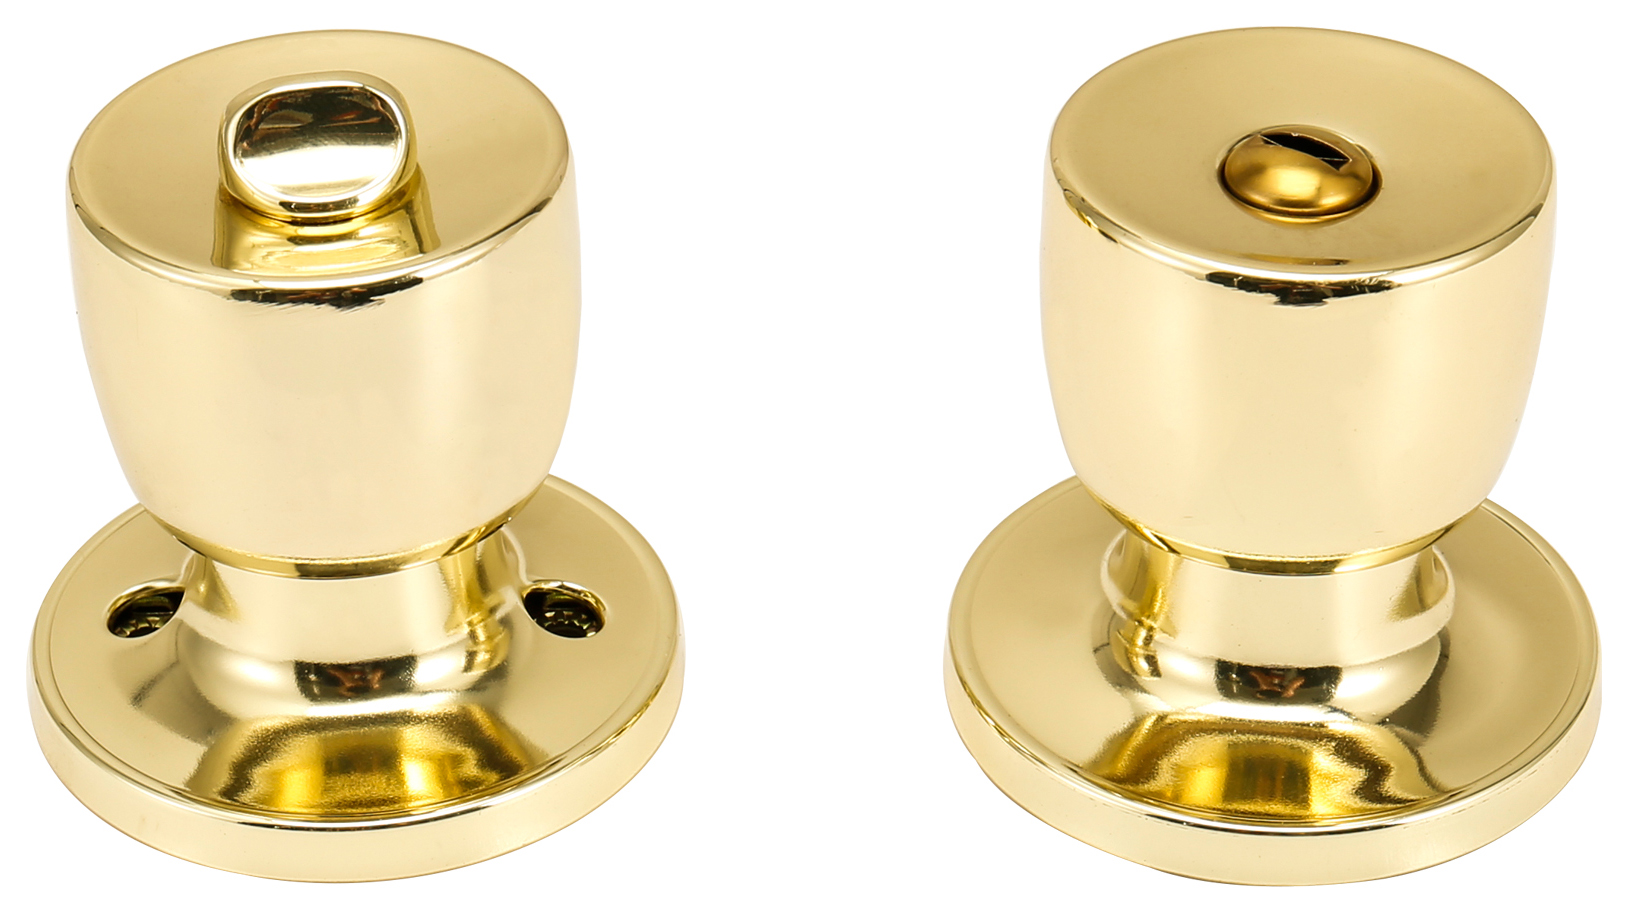 Privacy Door Knob Polished Brass - 1 Pair